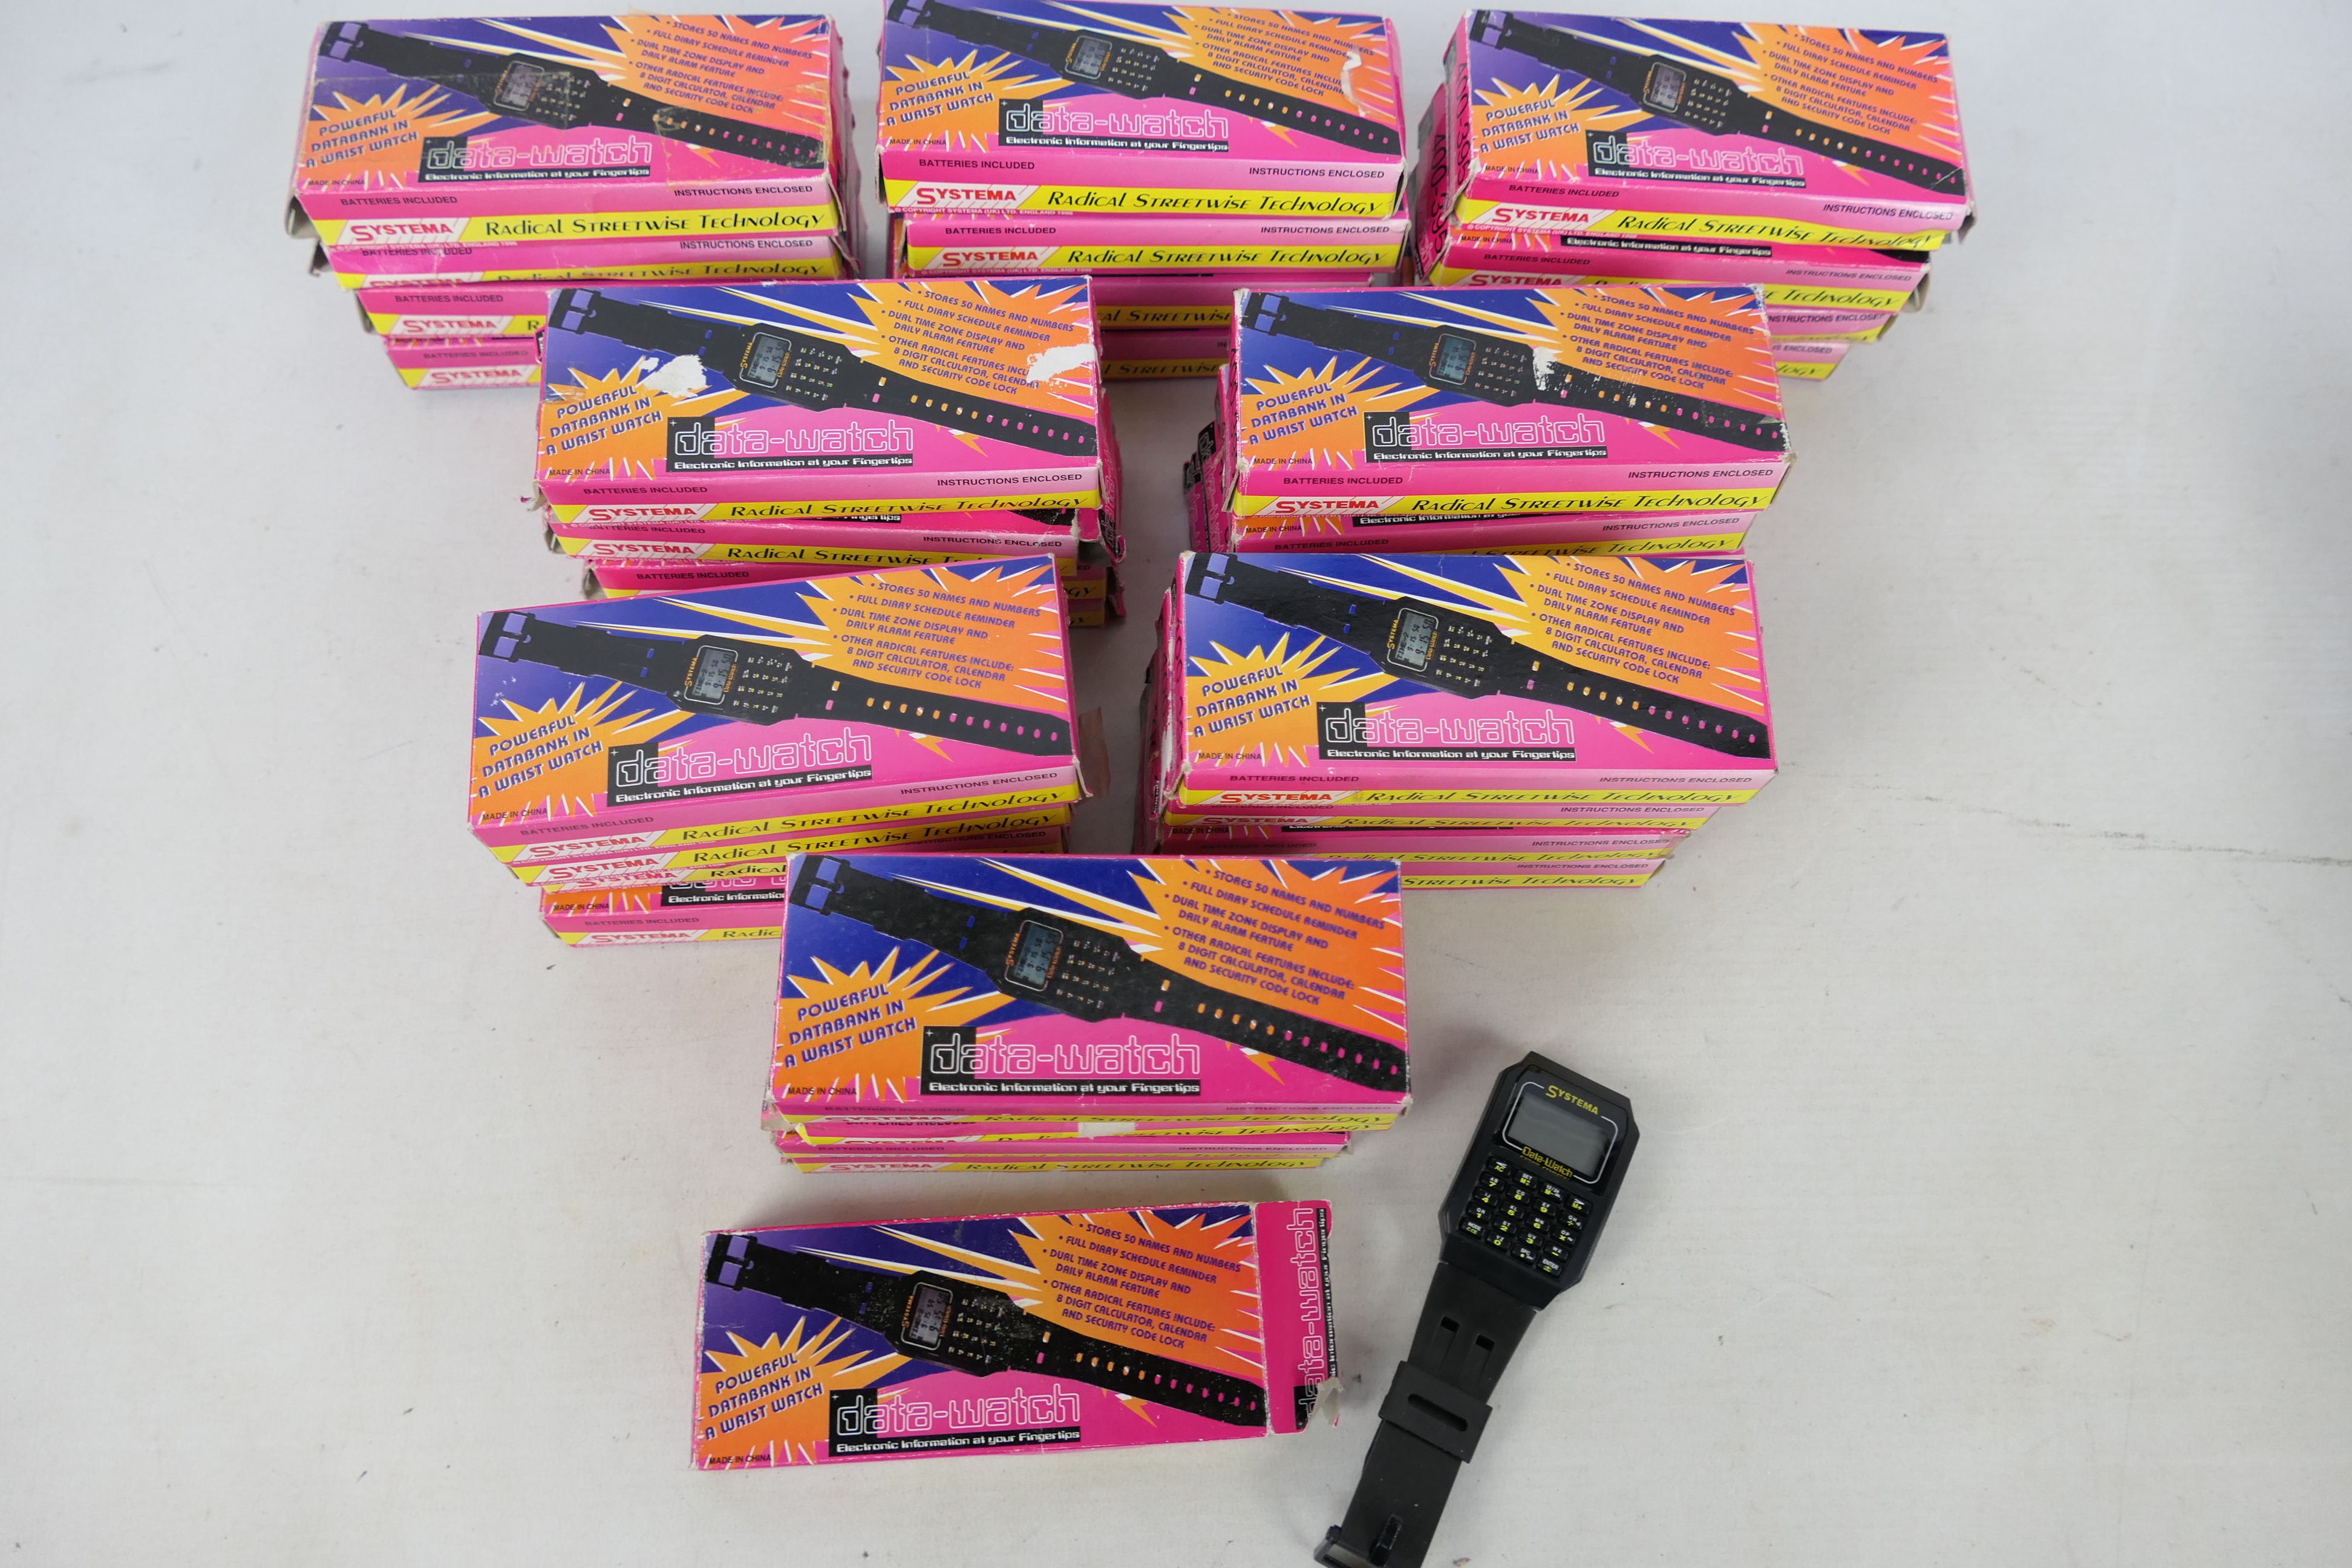 Systema - Unsold Shop Stock - 33 x boxed retro Electronic Data-watches from 1996.